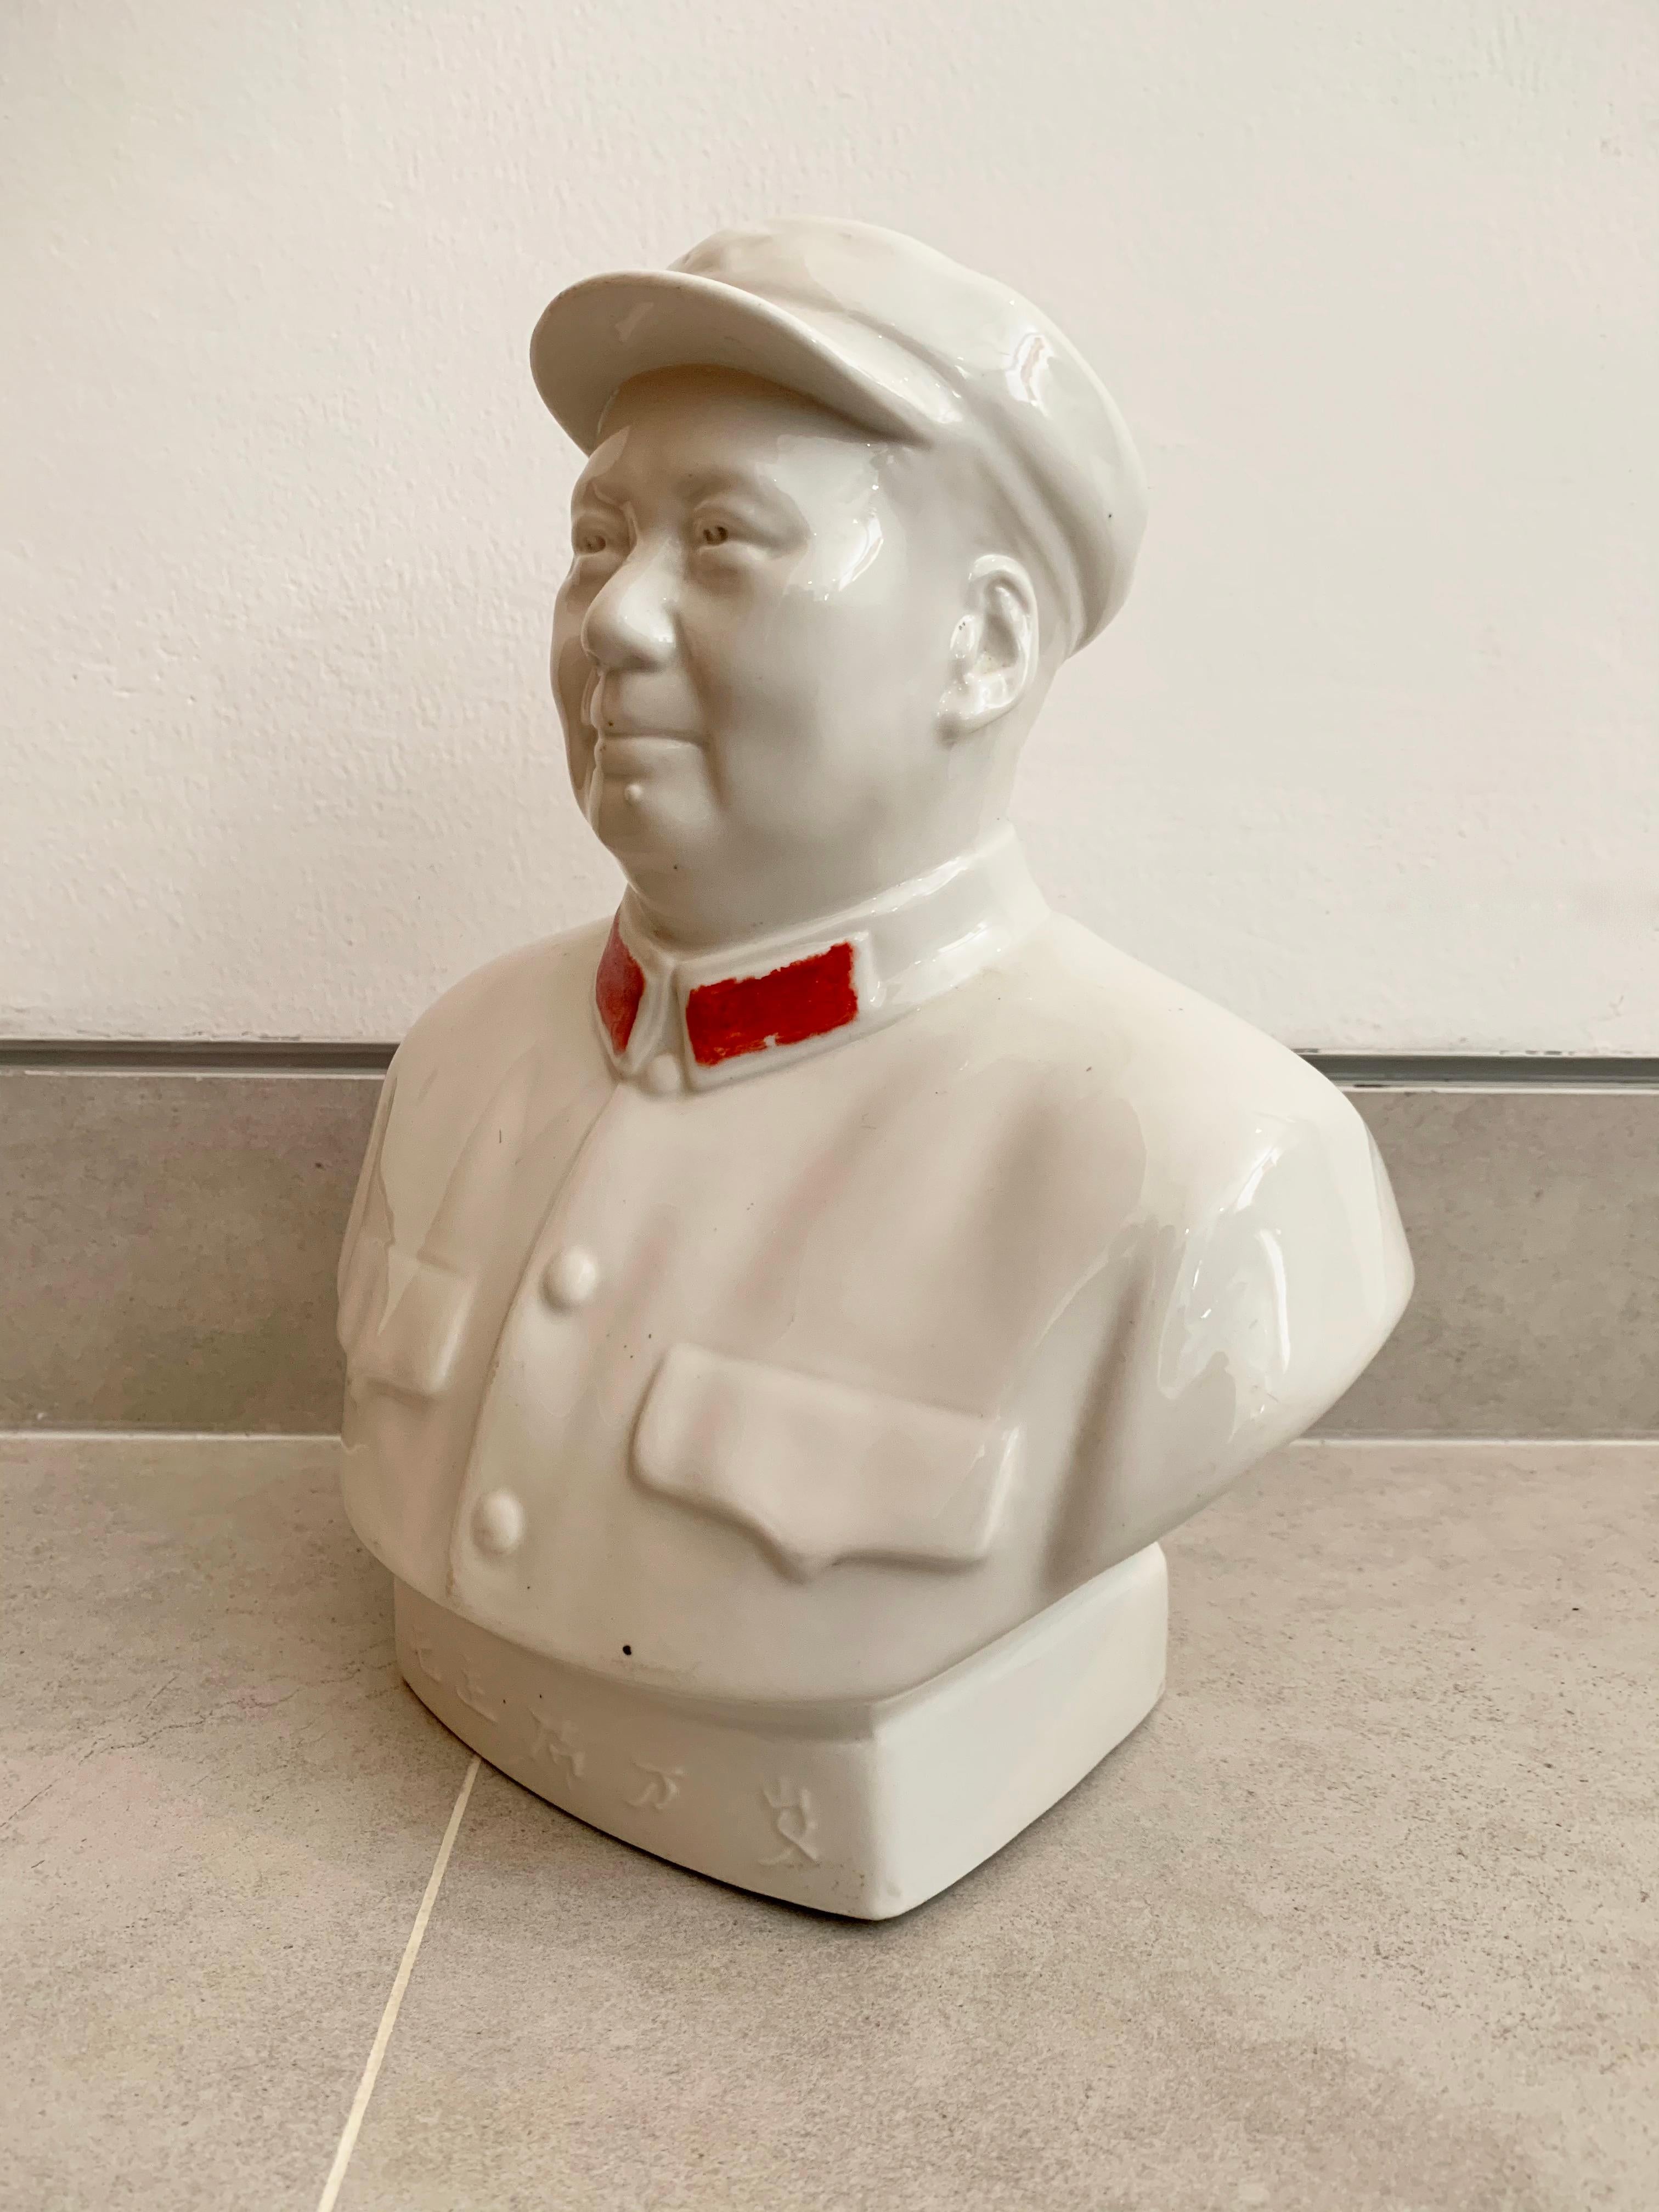 Chairman Mao Cultural Revolution Porcelain Figure dating to circa 1950. A great and imposing piece of memorabilia. 

Dimensions: Height 28cm x Width 23cm x Depth 14cm.